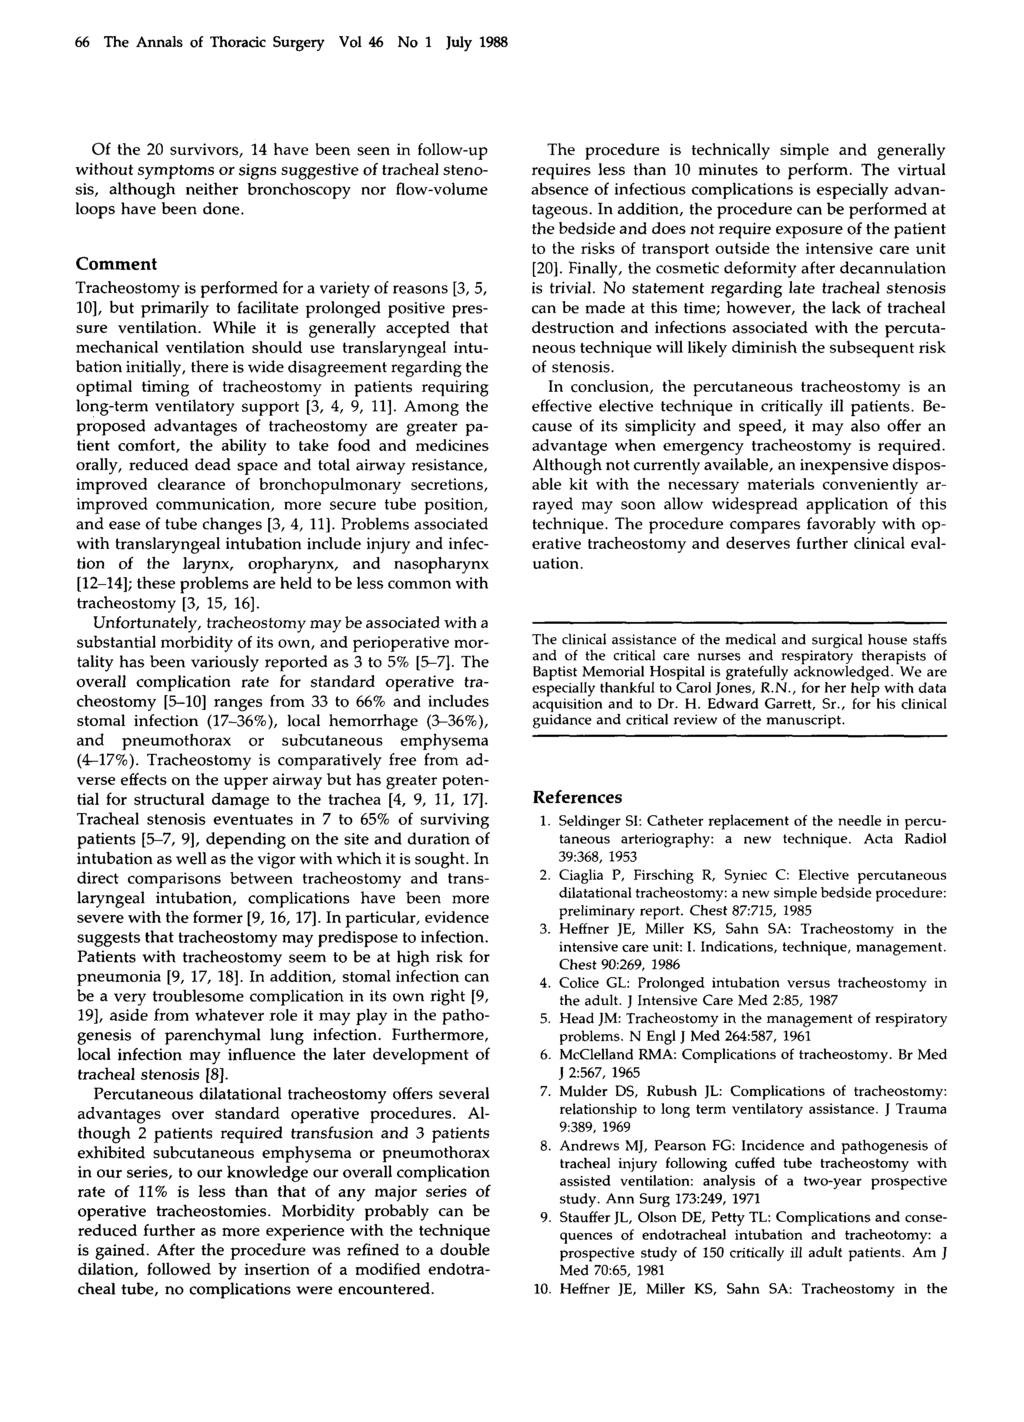 66 The Annals of Thoracic Surgery Vol 46 No 1 July 1988 Of the 20 survivors, 14 have been seen in follow-up without symptoms or signs suggestive of tracheal stenosis, although neither bronchoscopy